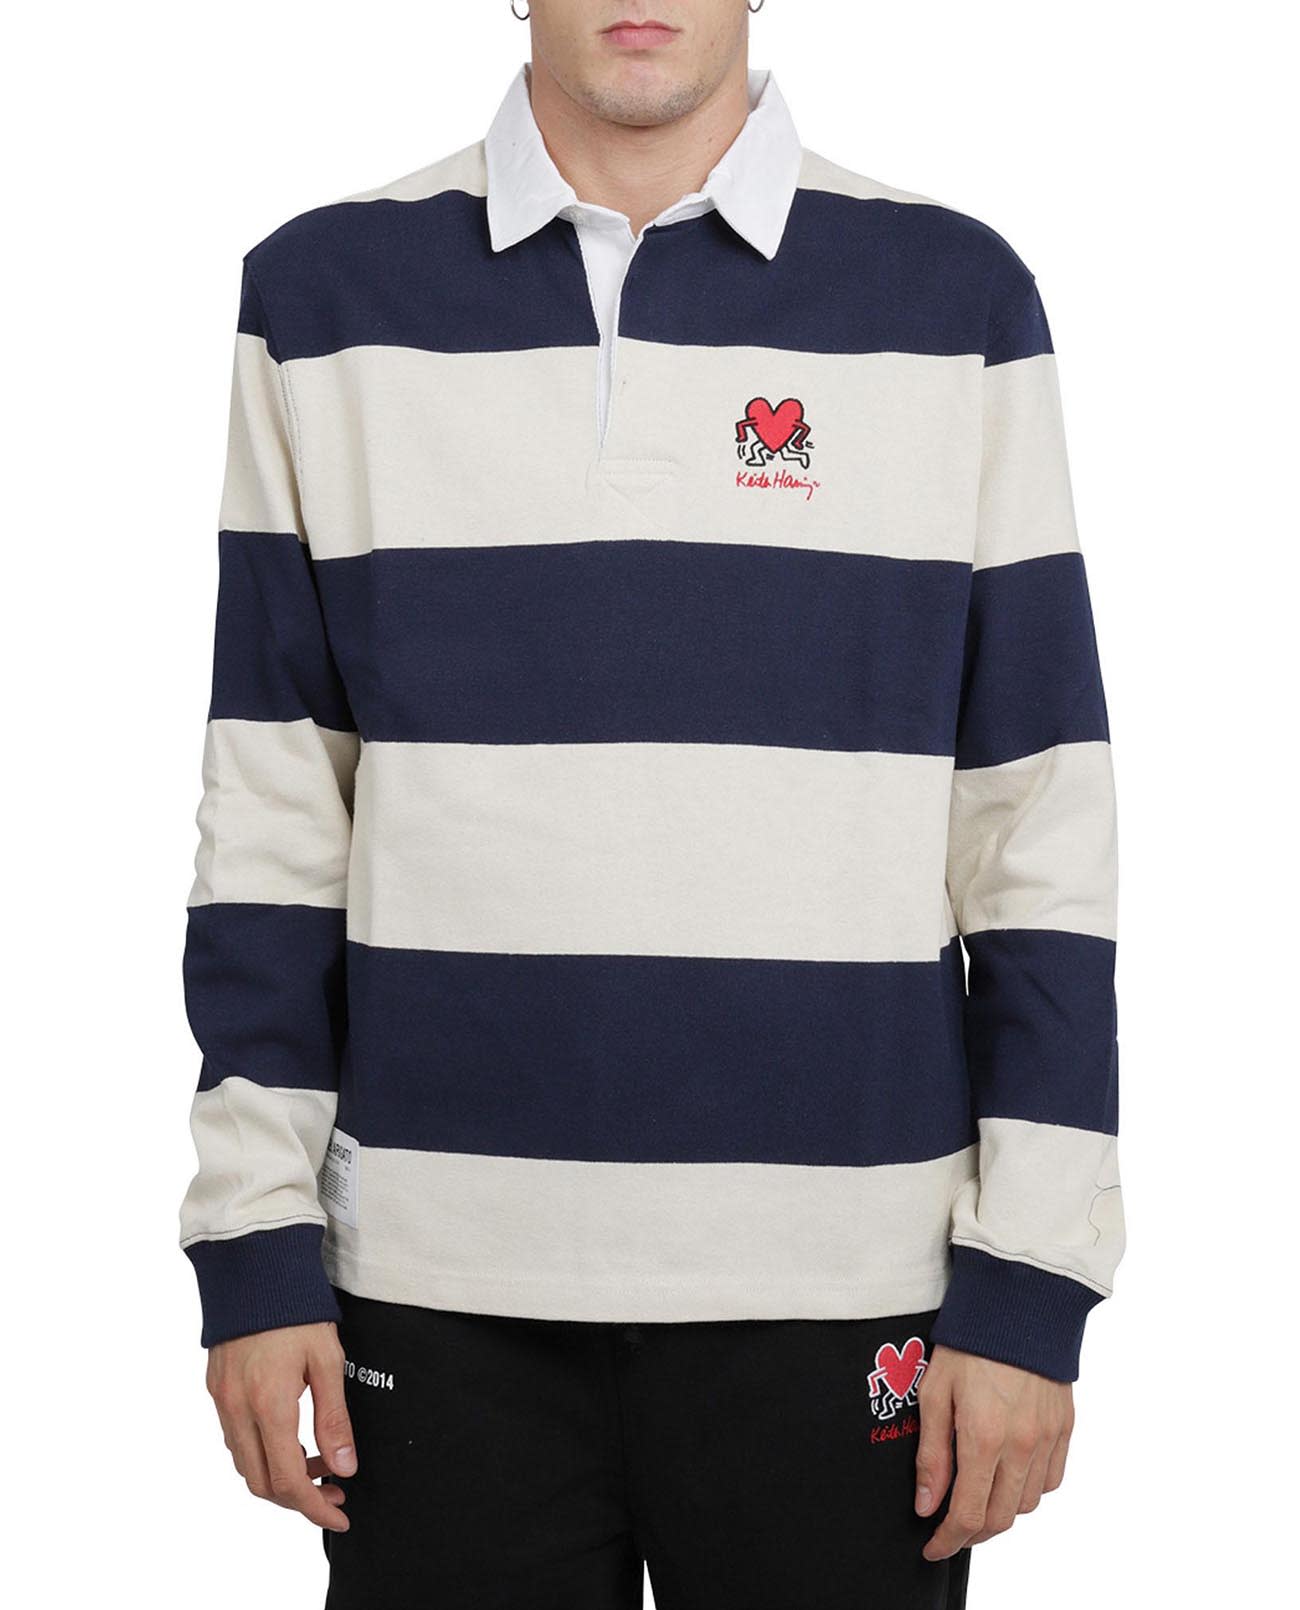 Axel Arigato Keith Haring Rugby Shirt